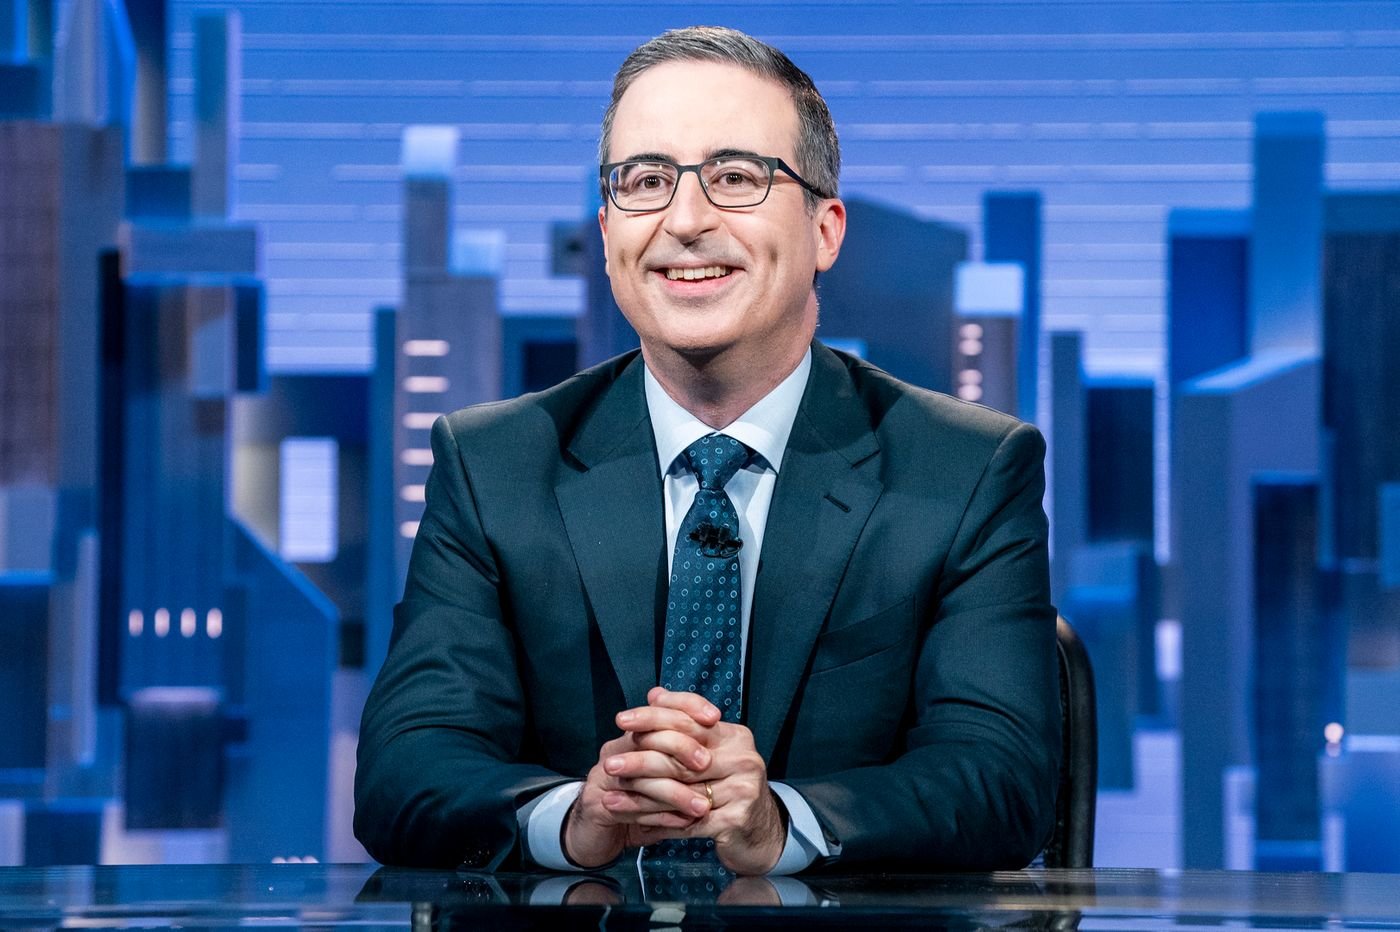 John Oliver returns for Season 9 of HBO’s “Last Week Tonight with John Oliver” on February 20th.